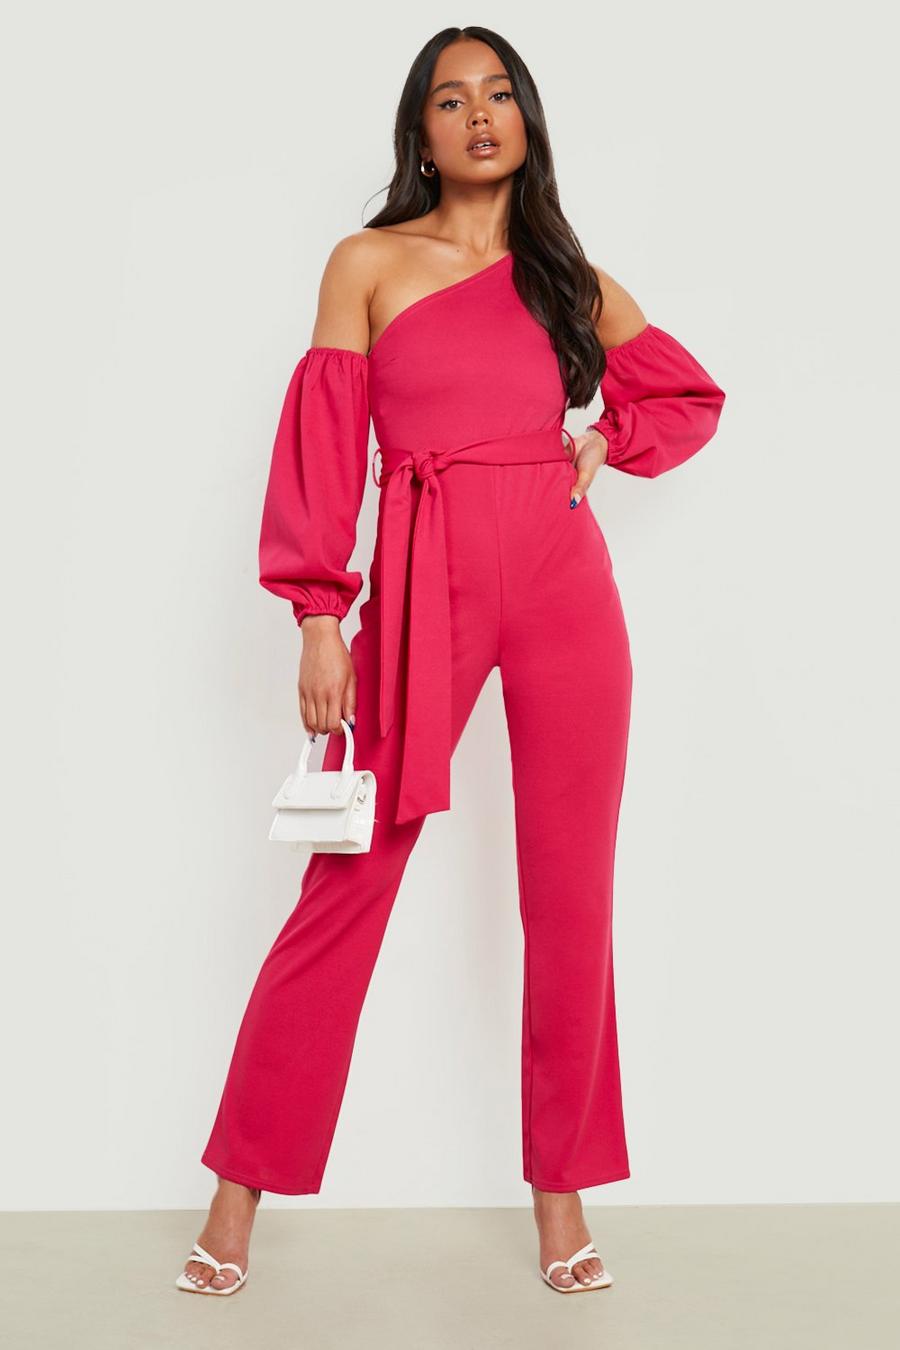 Hot pink Petite Puff Sleeve Asymmetric Belted Jumpsuit